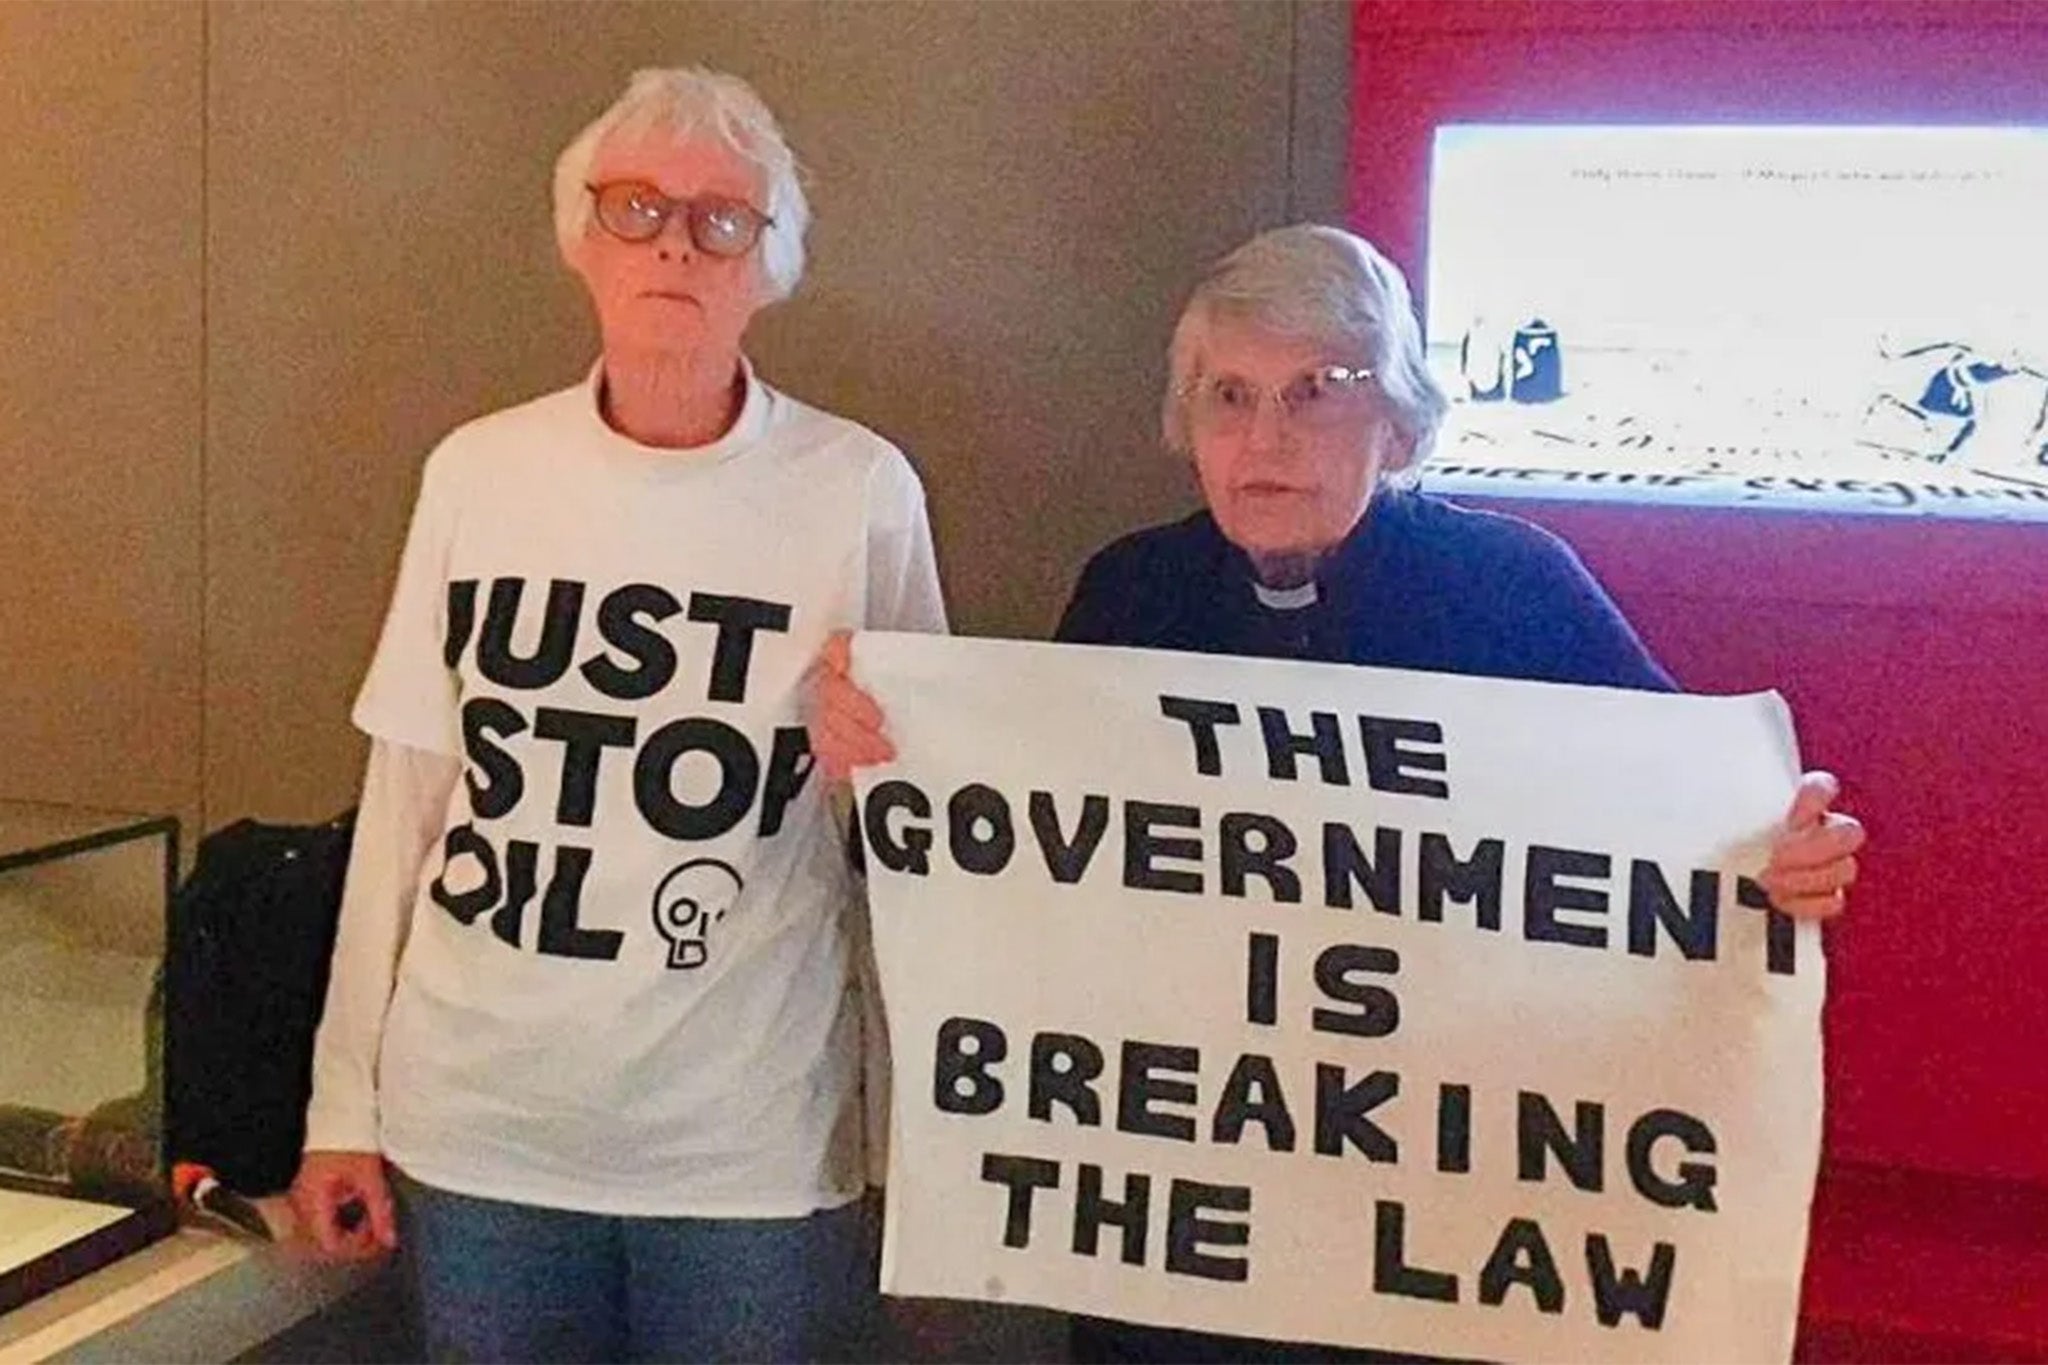 Two climate protesters smashed the glass around Magna Carta in the British Library on Friday, calling for the government to commit to emergency plans